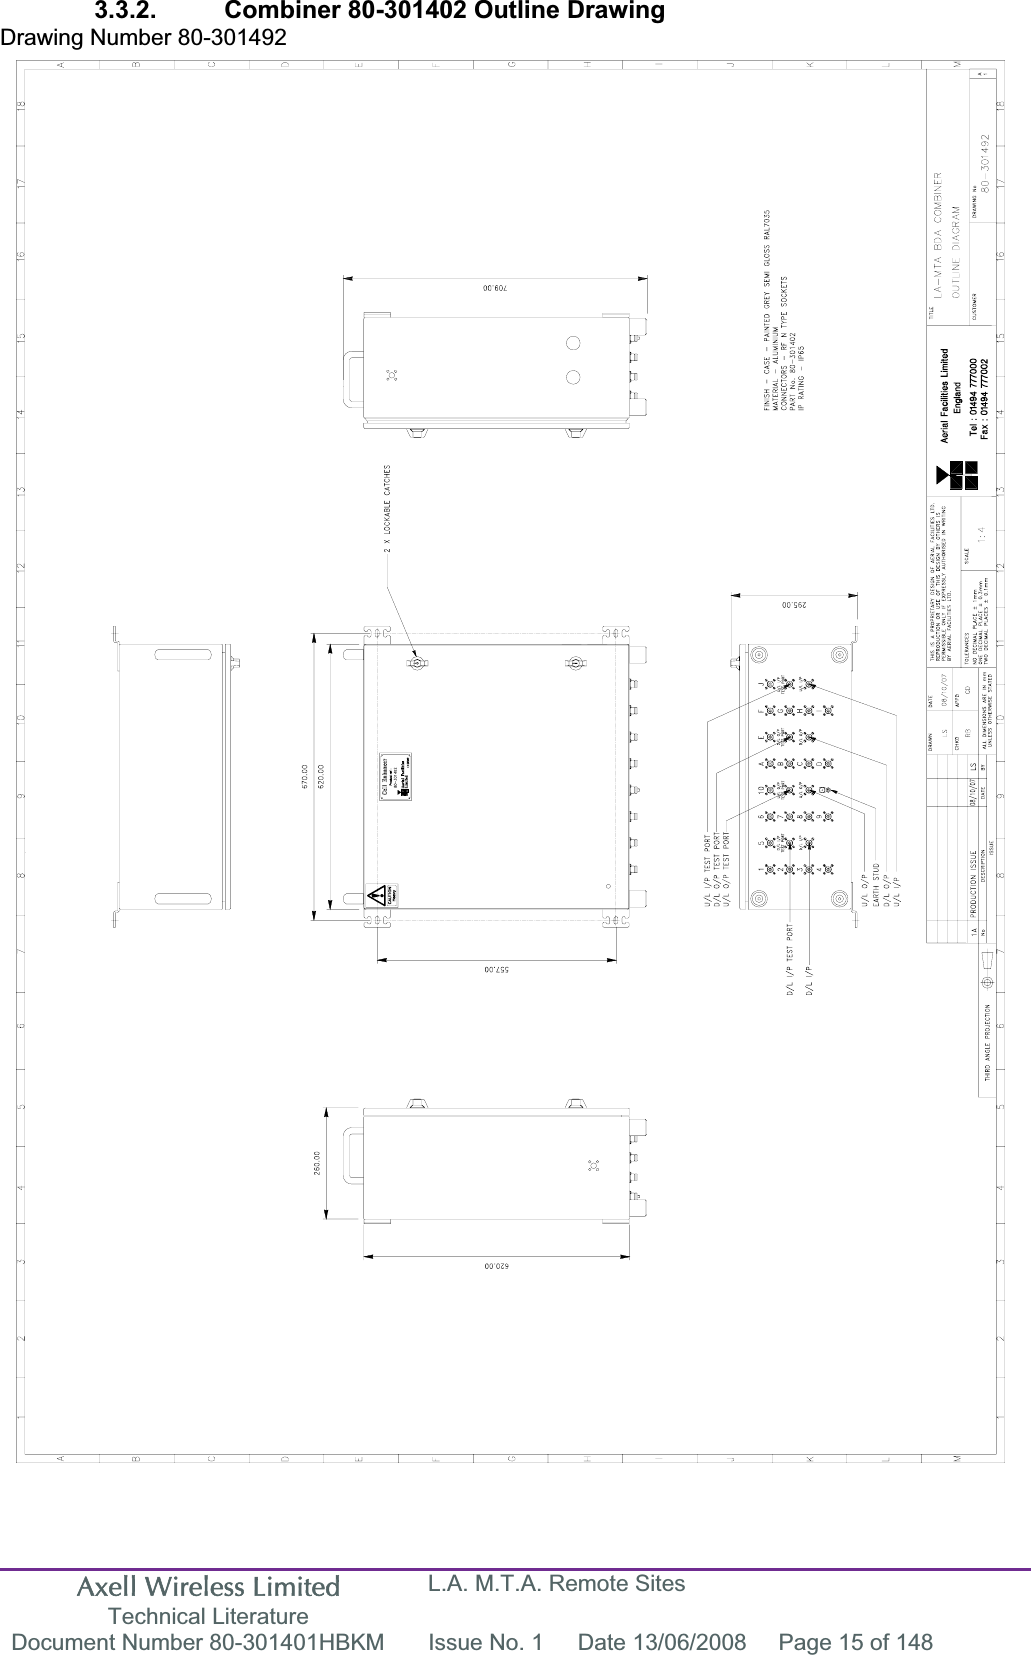 Axell Wireless Limited Technical Literature L.A. M.T.A. Remote Sites Document Number 80-301401HBKM  Issue No. 1  Date 13/06/2008  Page 15 of 148 3.3.2.  Combiner 80-301402 Outline Drawing Drawing Number 80-301492 